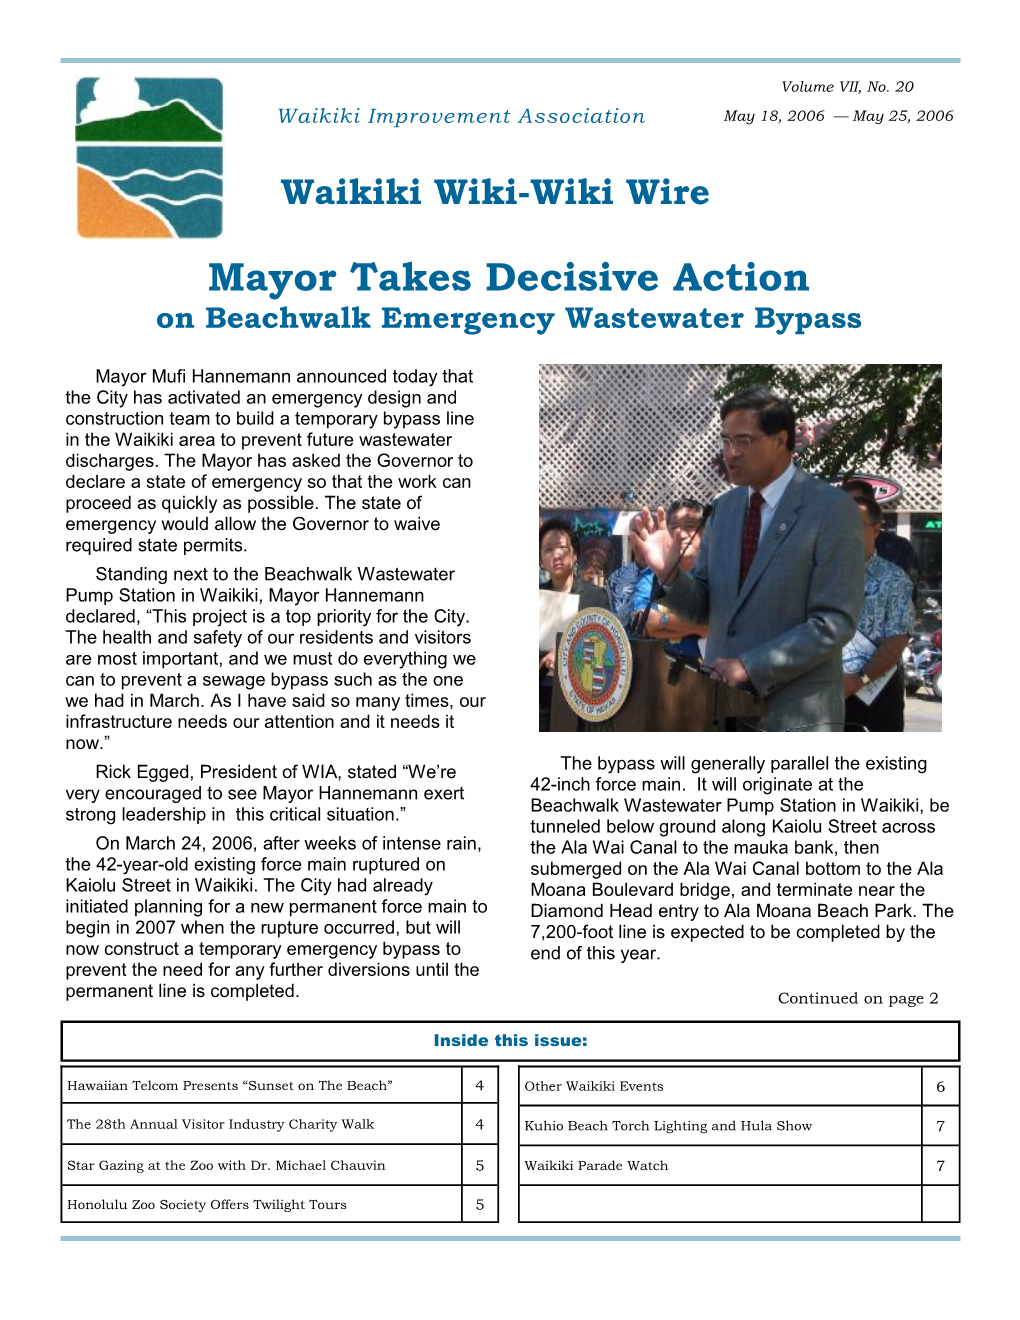 Mayor Takes Decisive Action on Beachwalk Emergency Wastewater Bypass